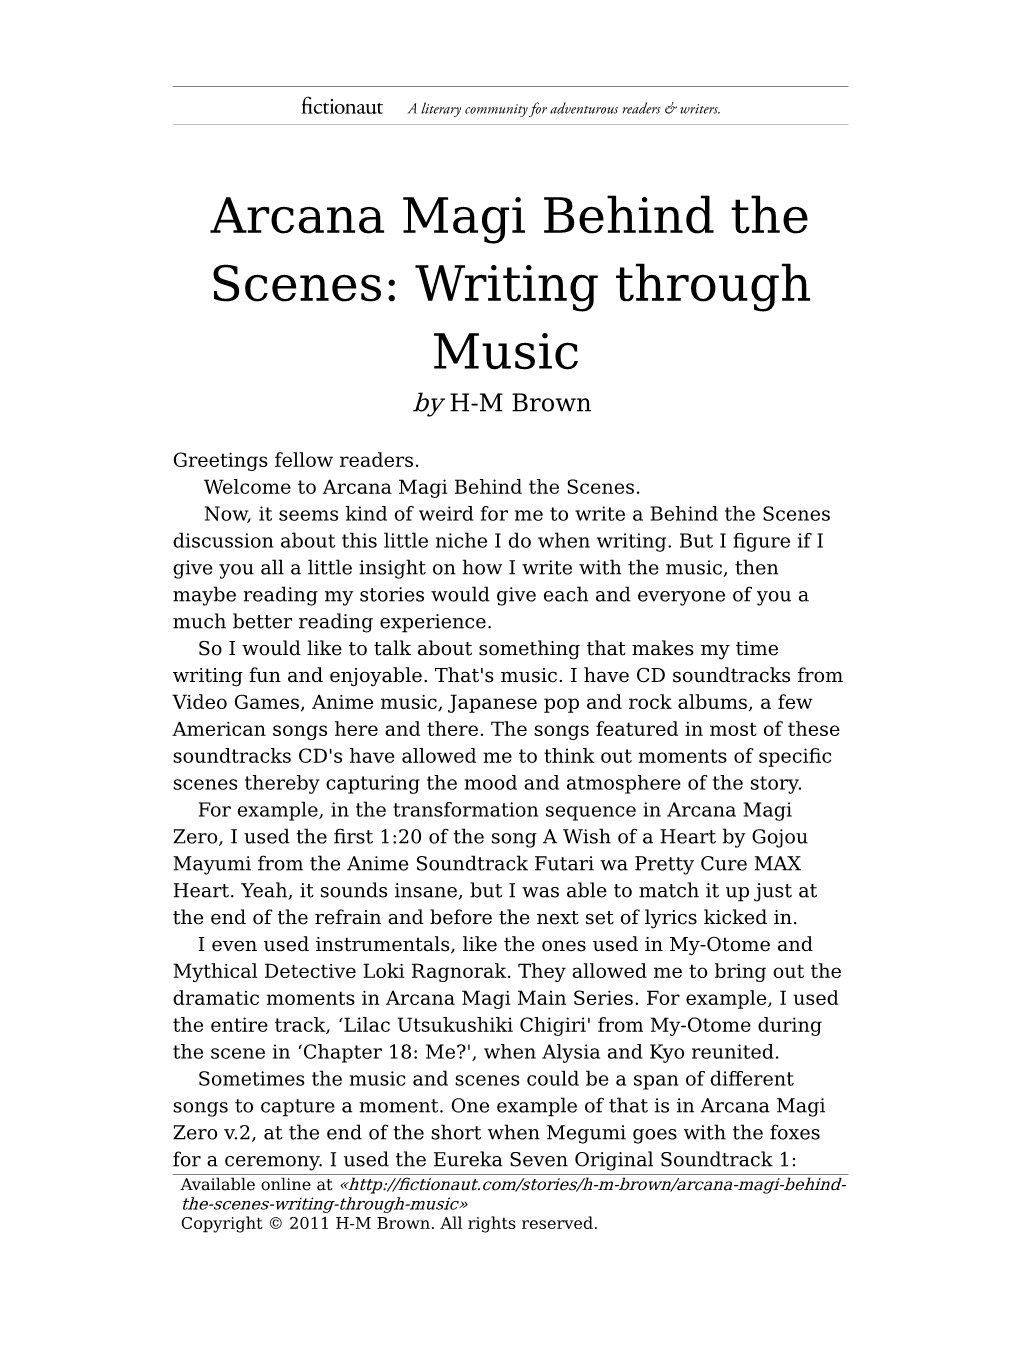 Arcana Magi Behind the Scenes: Writing Through Music by H-M Brown